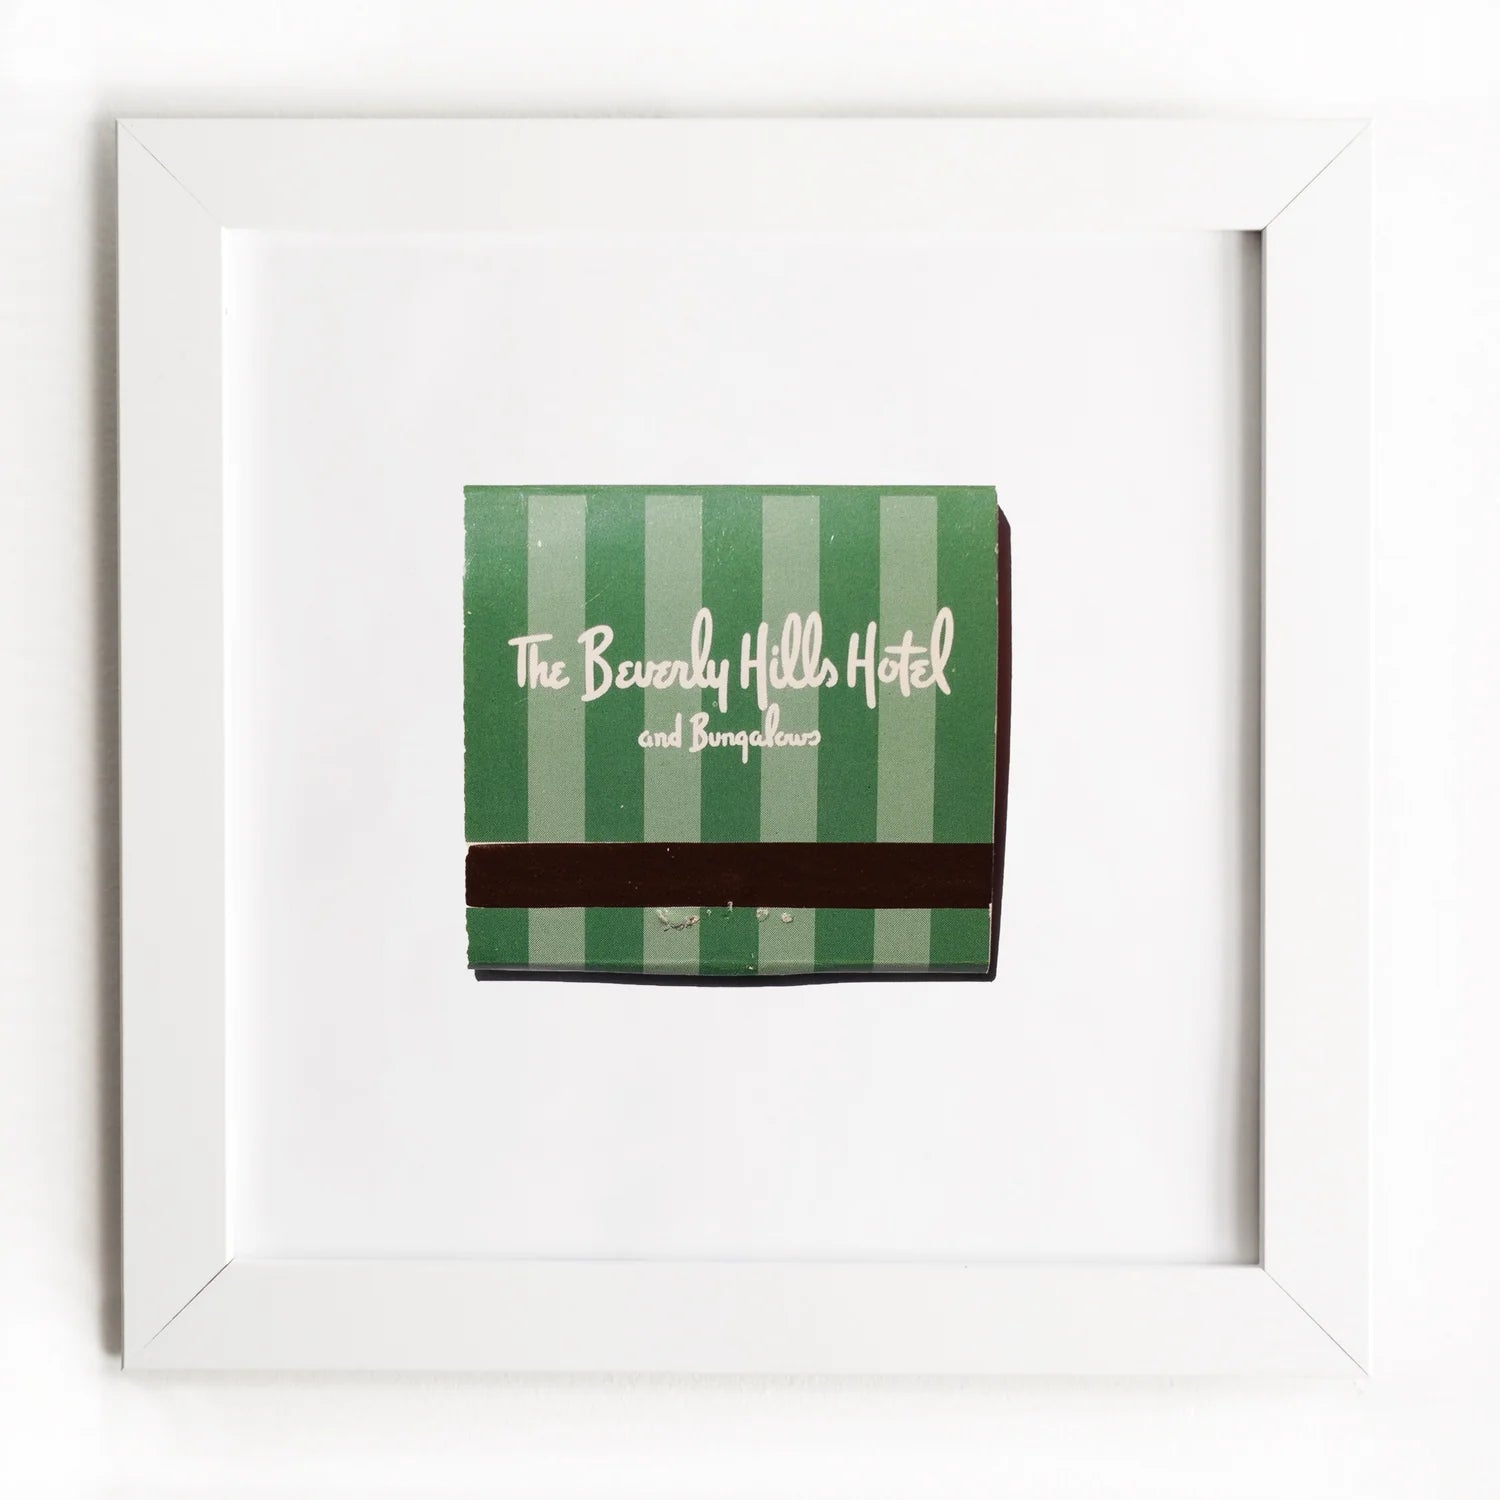 An Art Square White Frame from Match South, featuring green and white stripes with brown accents, is displayed in a simple white frame against a white background.